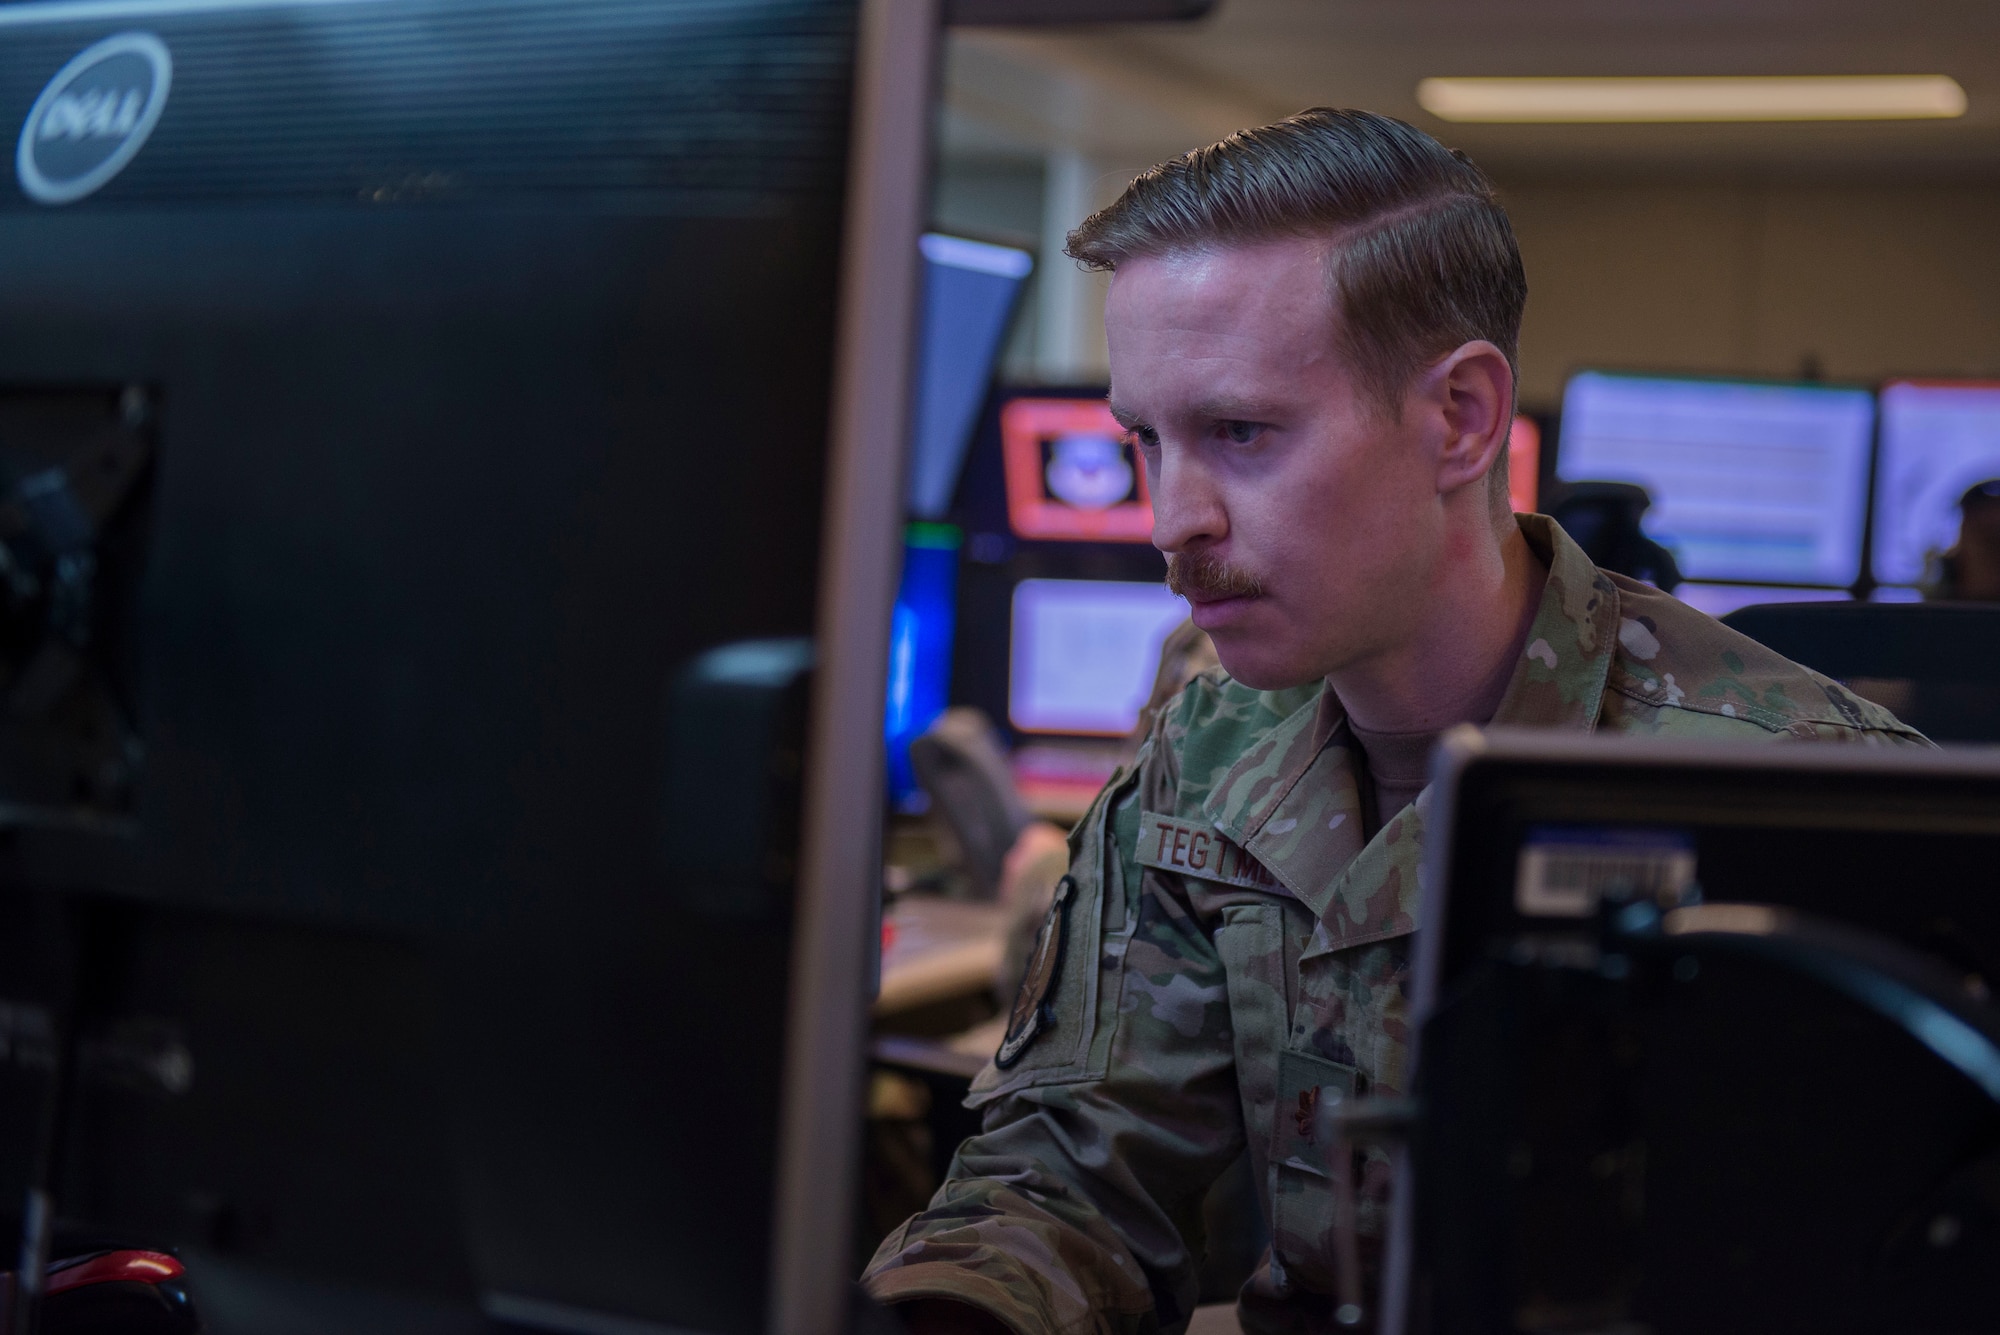 U.S. Air Force Maj. Christopher Tegmeyer, 727th Expeditionary Air Control Squadron, also known as “Kingpin,” mission commander, monitors information during Air Missile and Defense Exercise (AMDEX) 21-1 at Al Dhafra Air Base, United Arab Emirates, Oct. 23, 2020.